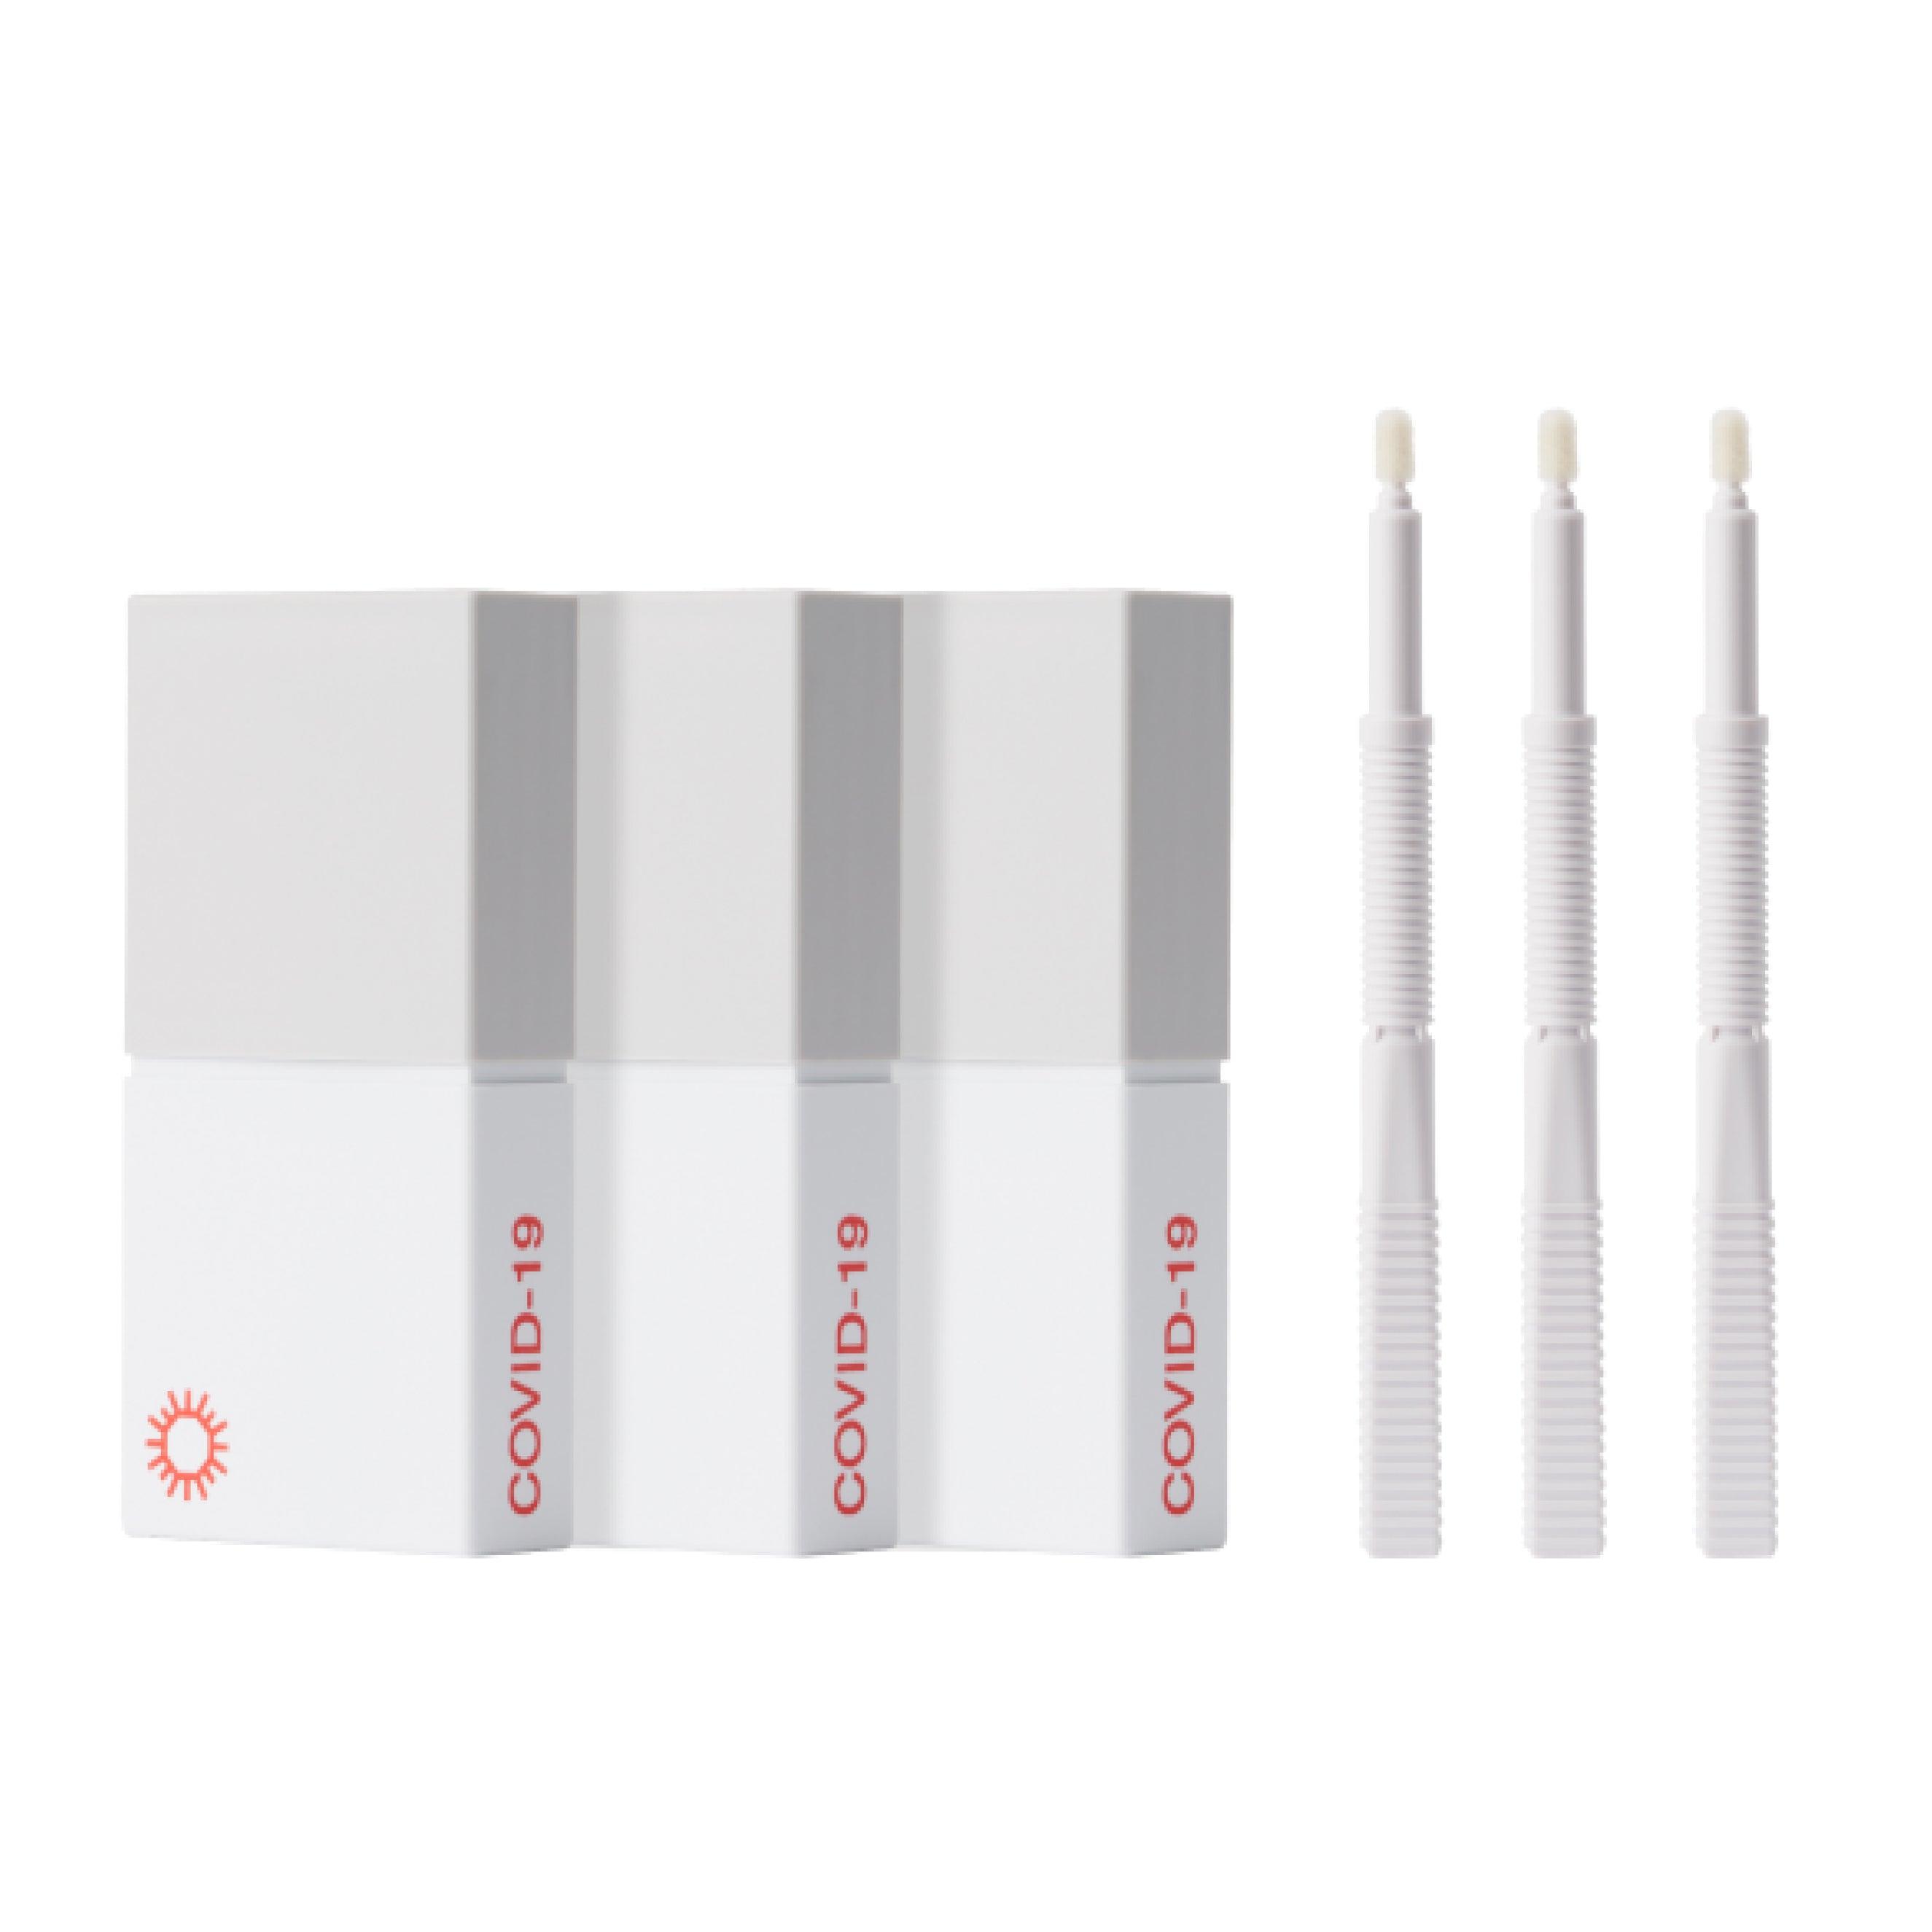 COVID-19 Tests - 3 Pack